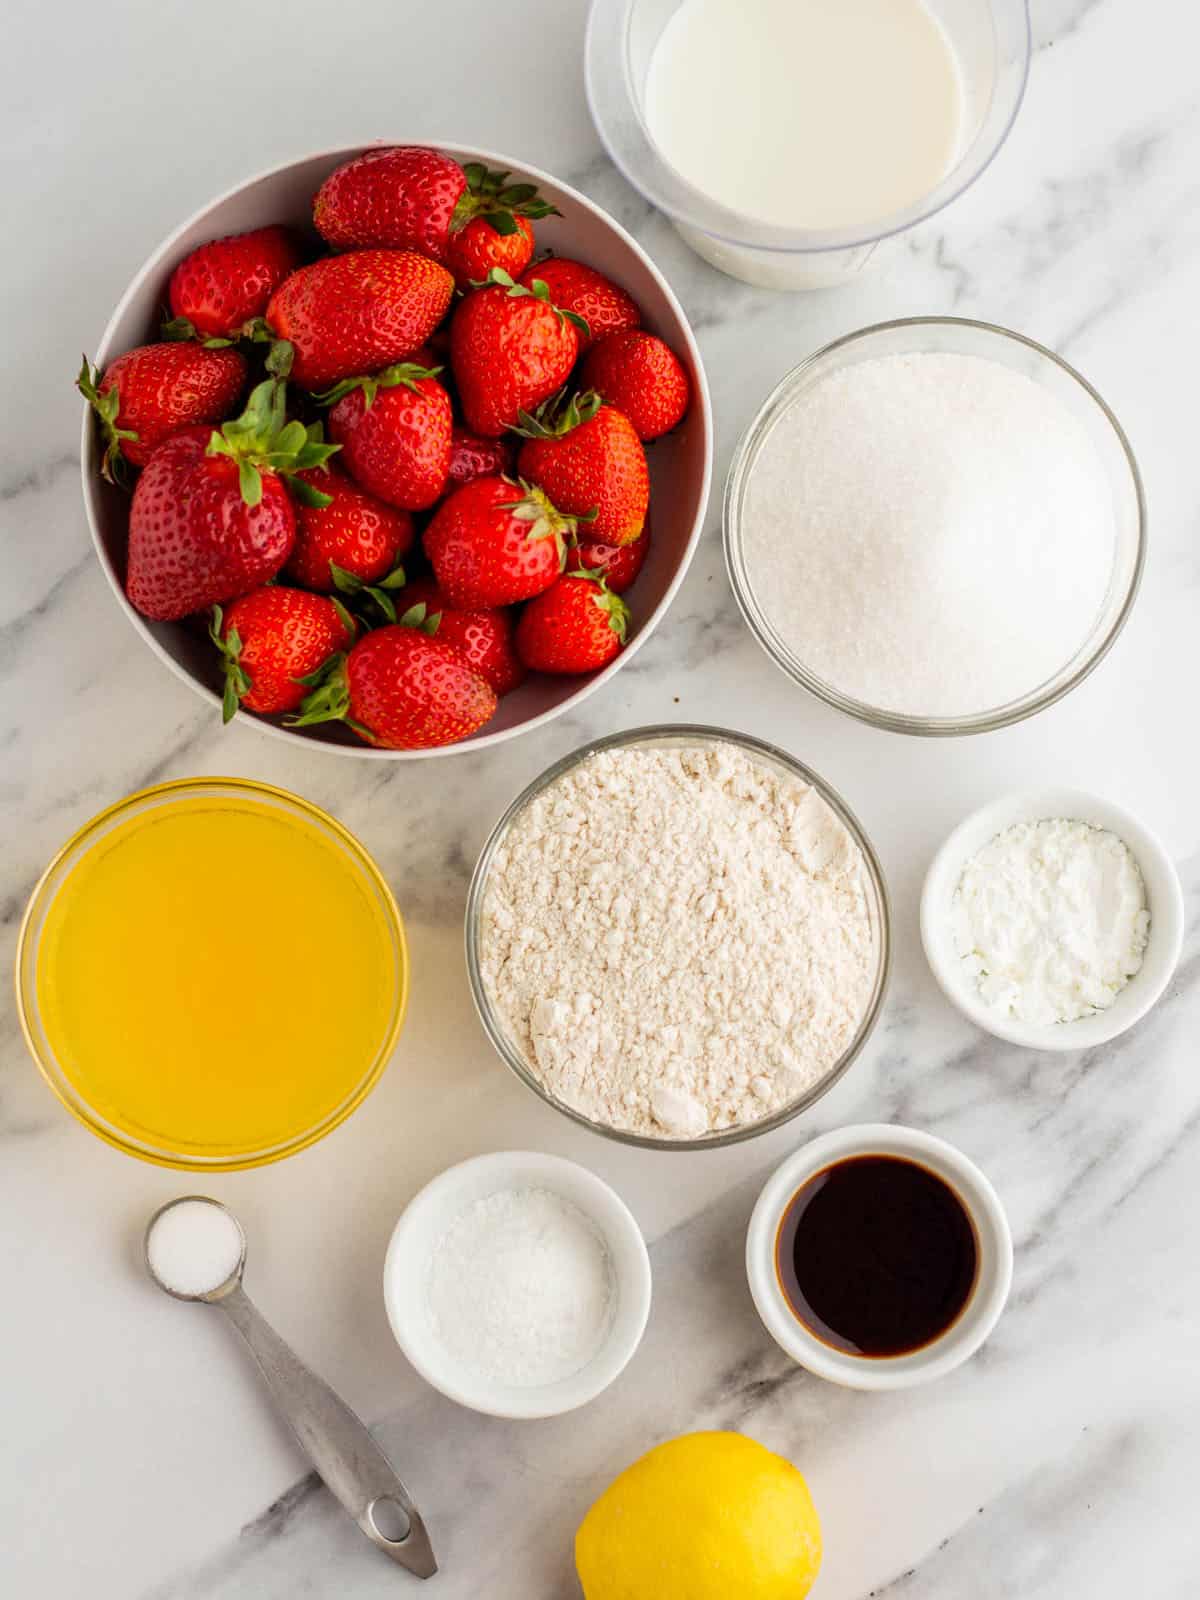 Ingredients in bowls on a white and gray granite counter. Fresh strawberries, flour, baking powder, lemon juice, and more. Surrounded by a fresh lemon and a measuring spoon. 